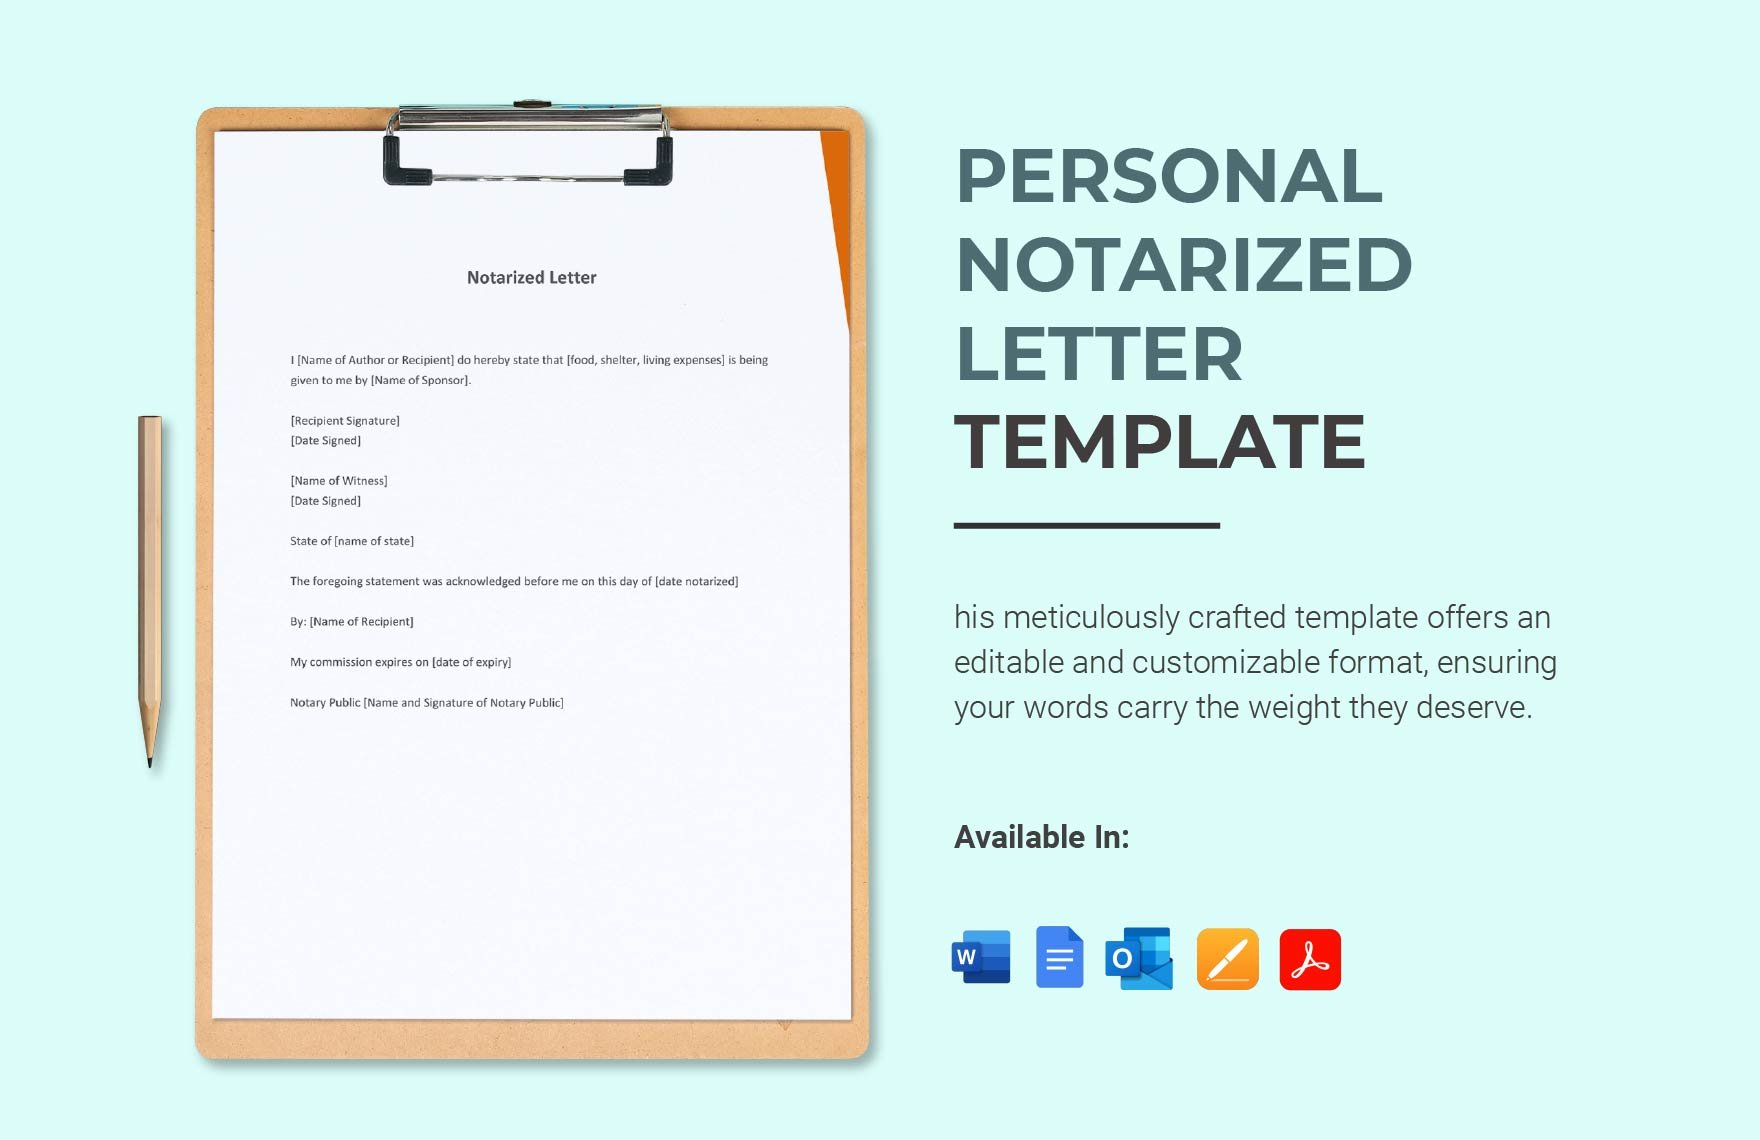 Personal Notarized Letter